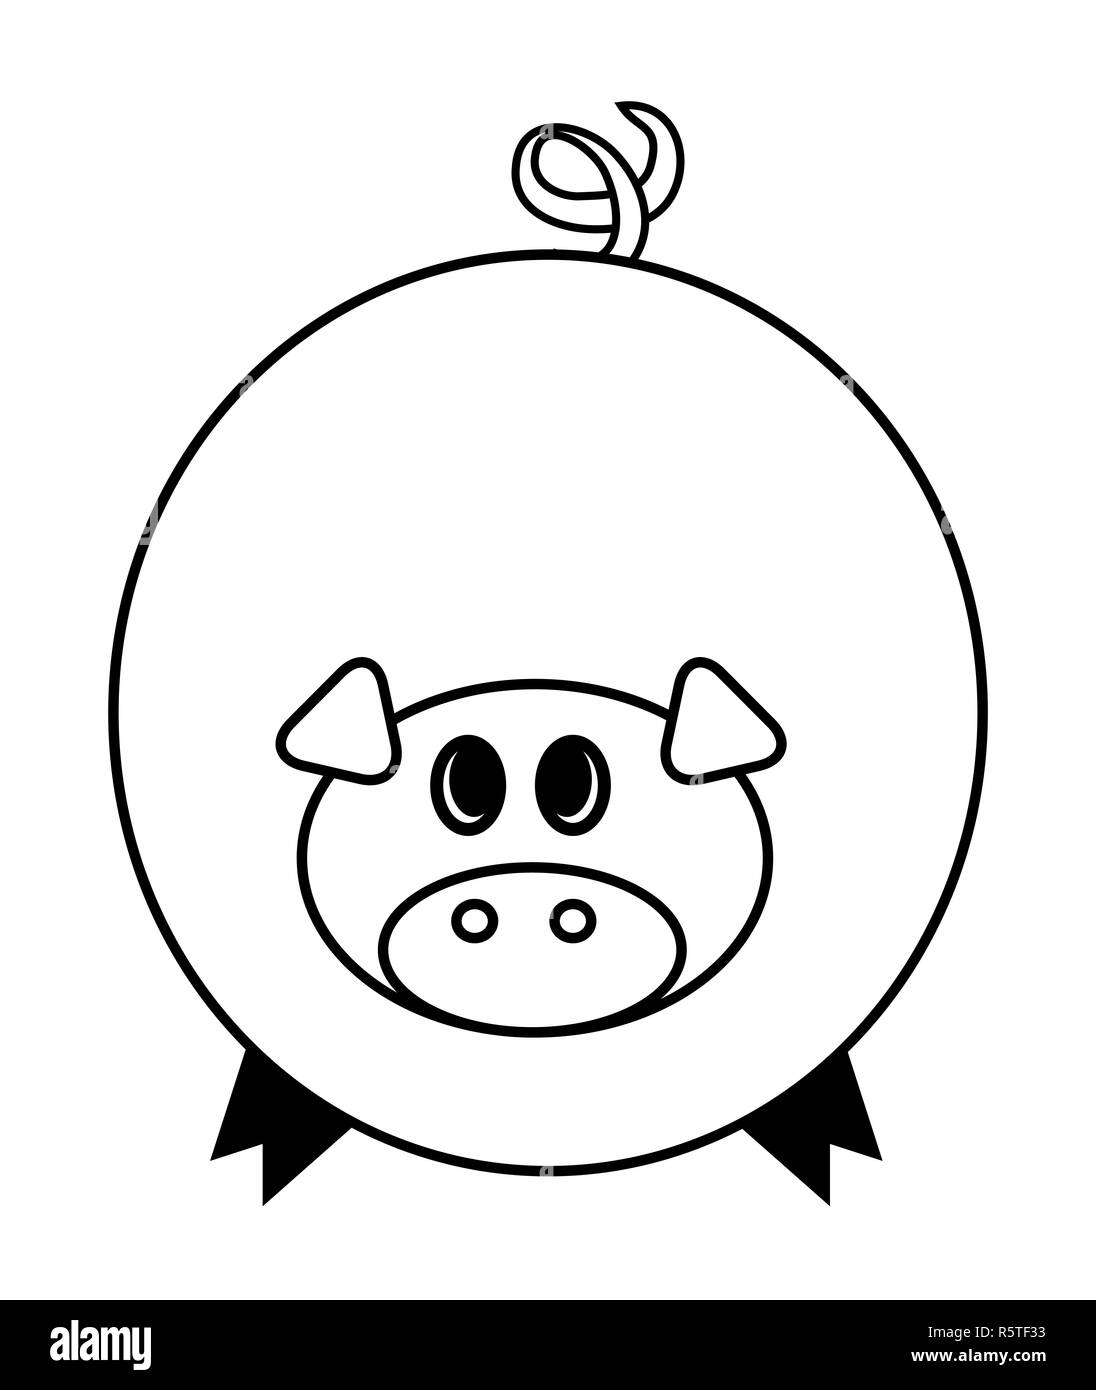 raccoon face clipart black and white pig